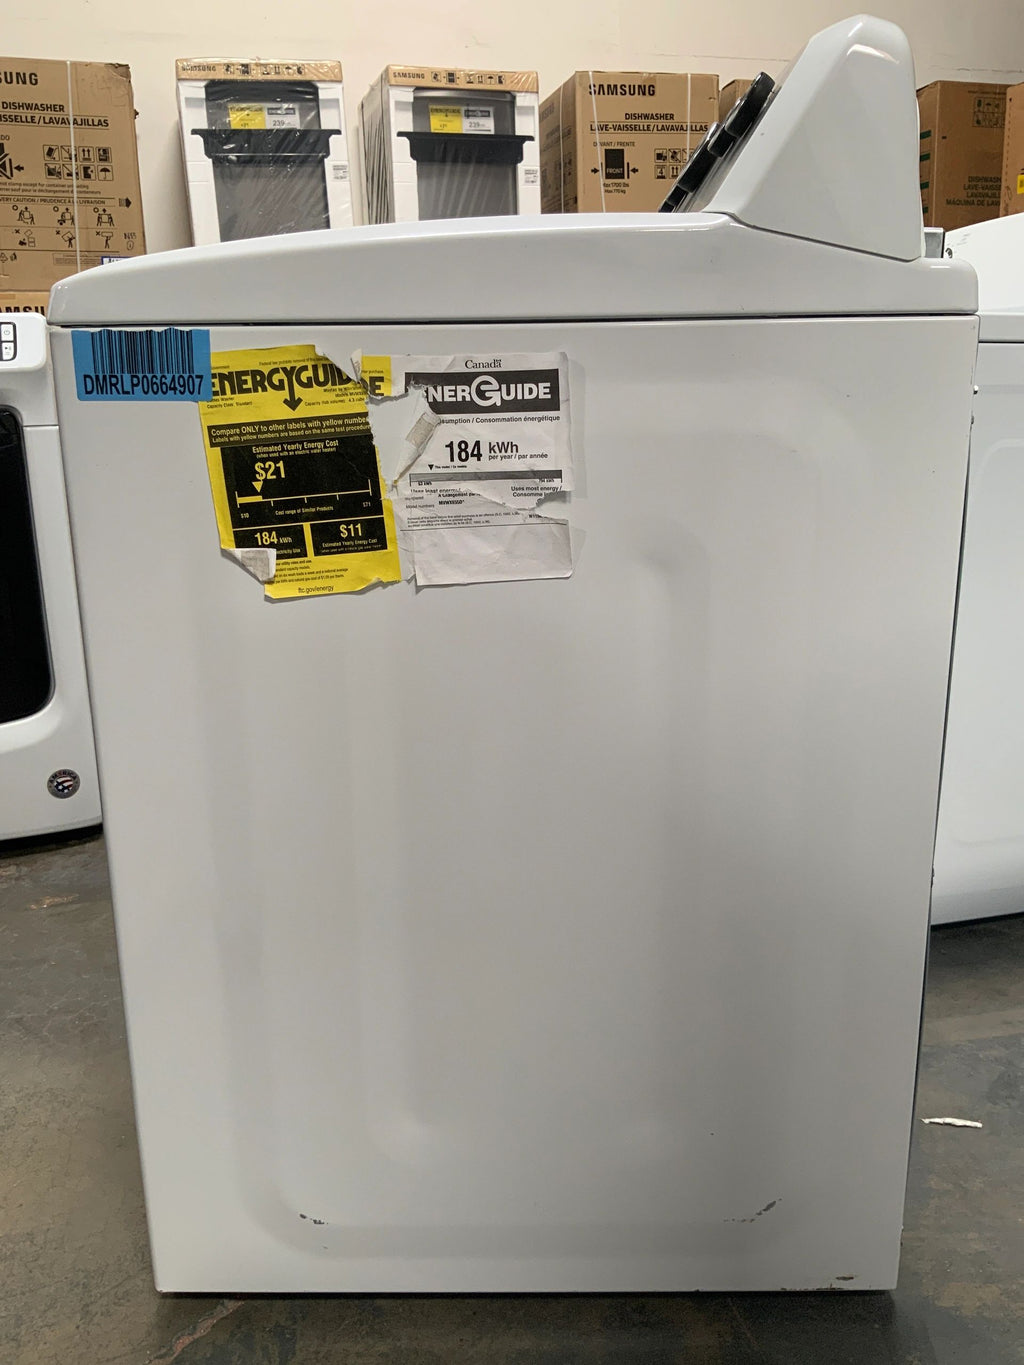 New Open Box. Set of Washer Maytag 4.3-cu ft High Efficiency Impeller Top-Load Washer (White) and Dryer Maytag Bravos 7.0 cu. ft. Electric Dryer in White. Model: MEDX655DW1, MVWX655DW